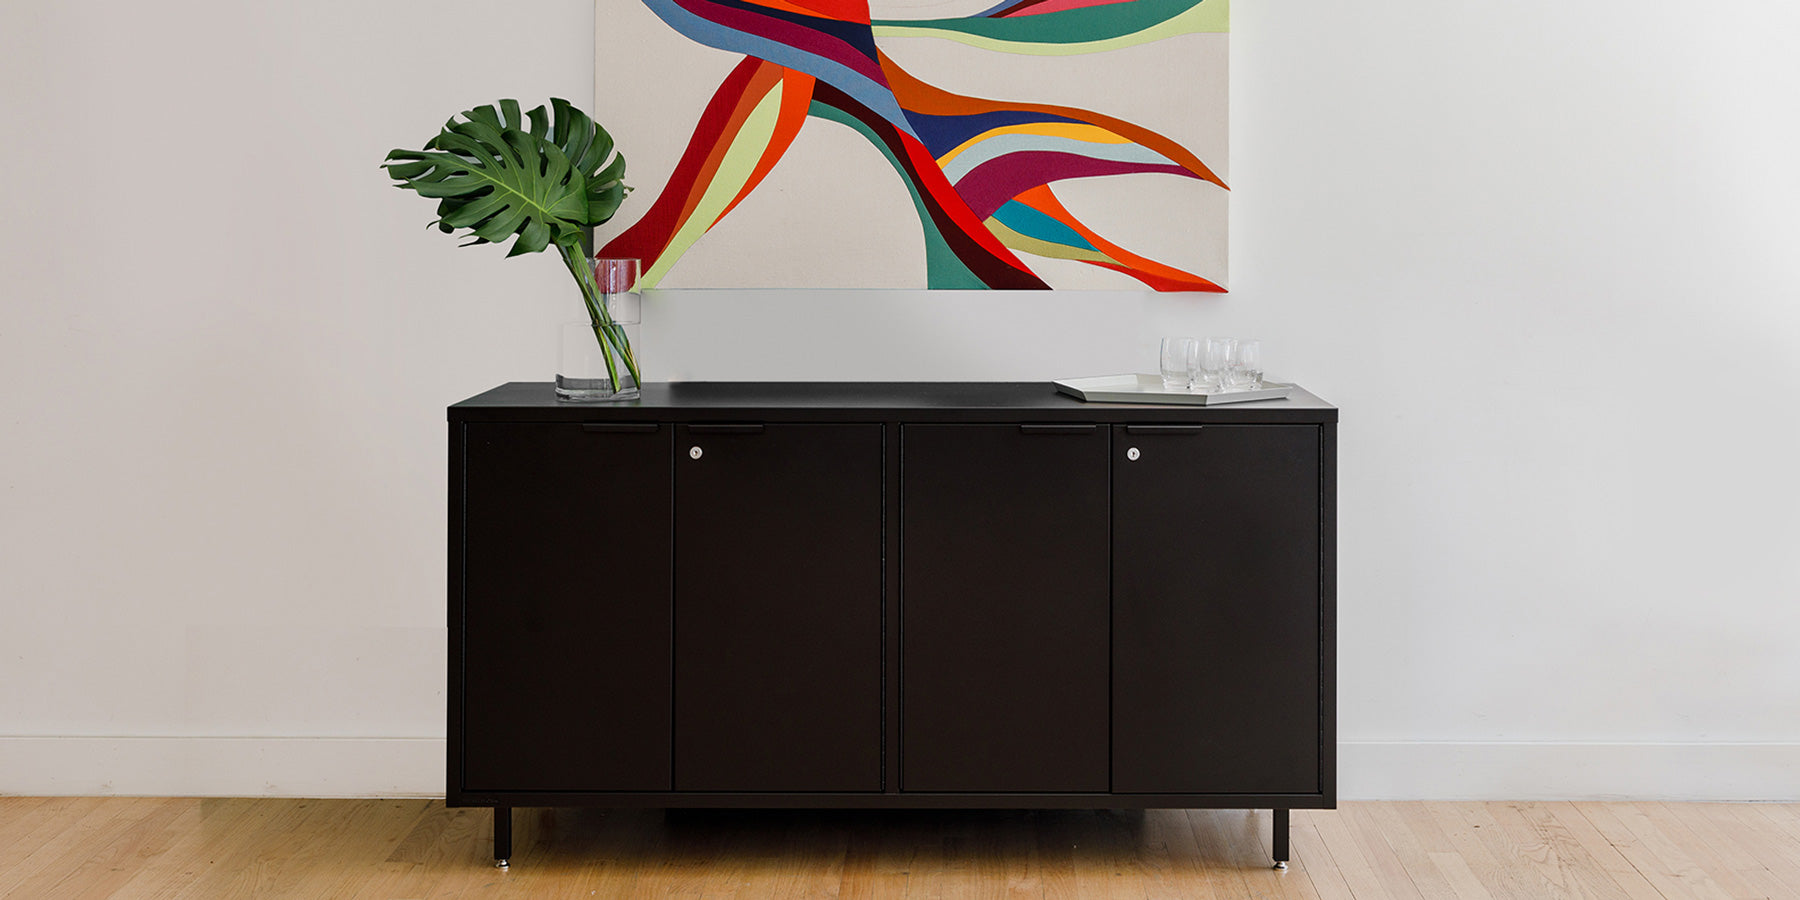 Heartwork Active Duty storage credenza in black against white wall with a painting in the background